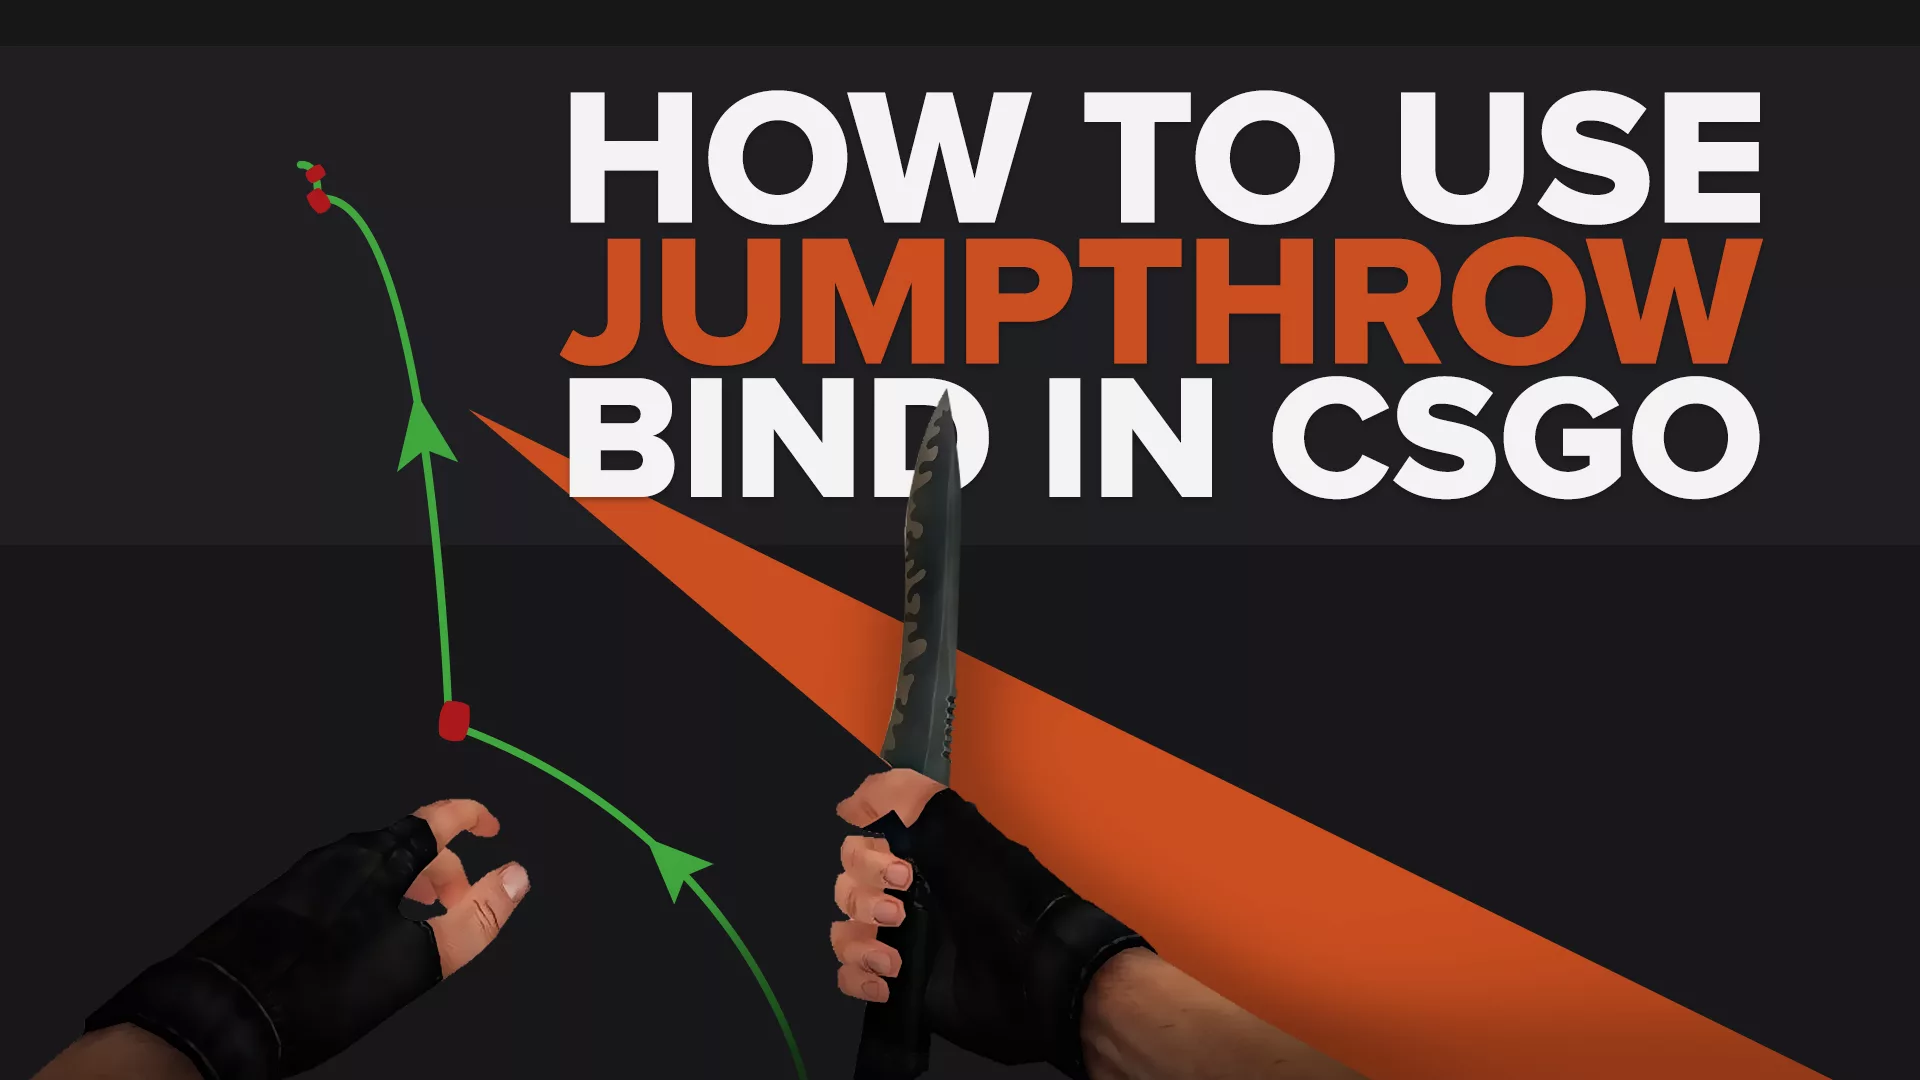 How To Use The Jump Throw Bind In CSGO?